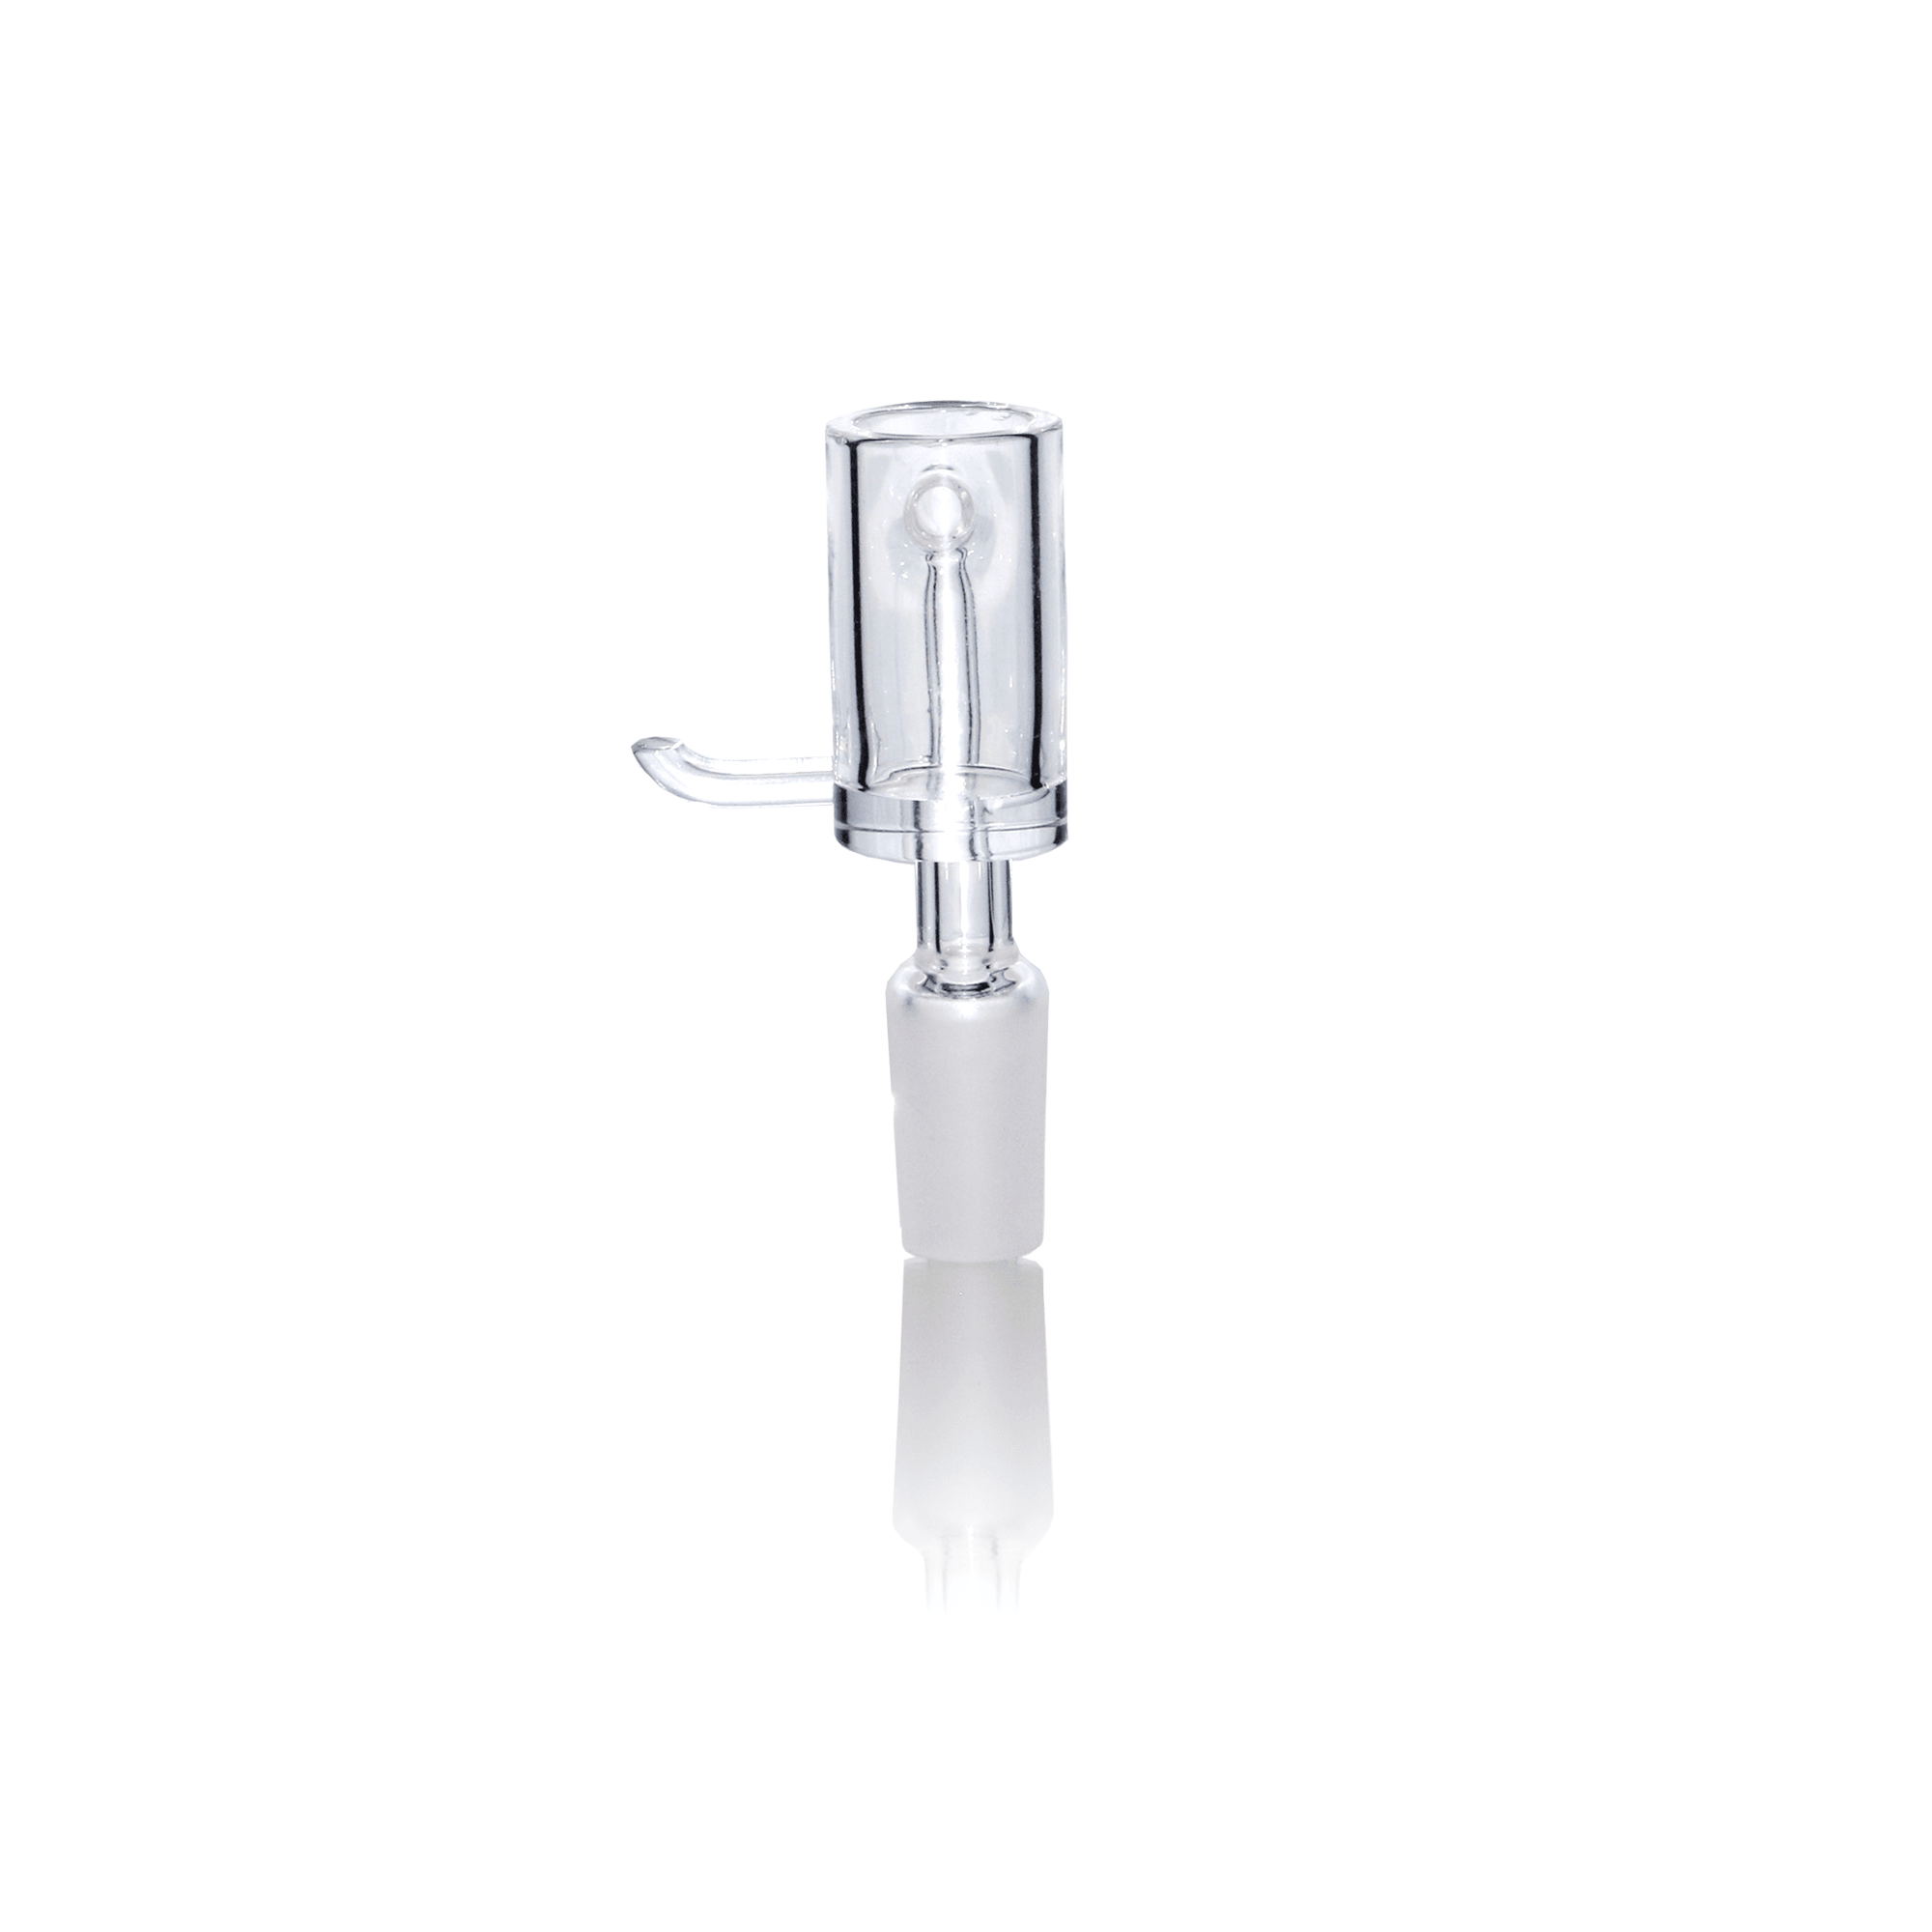 14mm Male Quartz E-Banger for 20mm Coil With Saucer Cap | Rear View | the dabbing specialists